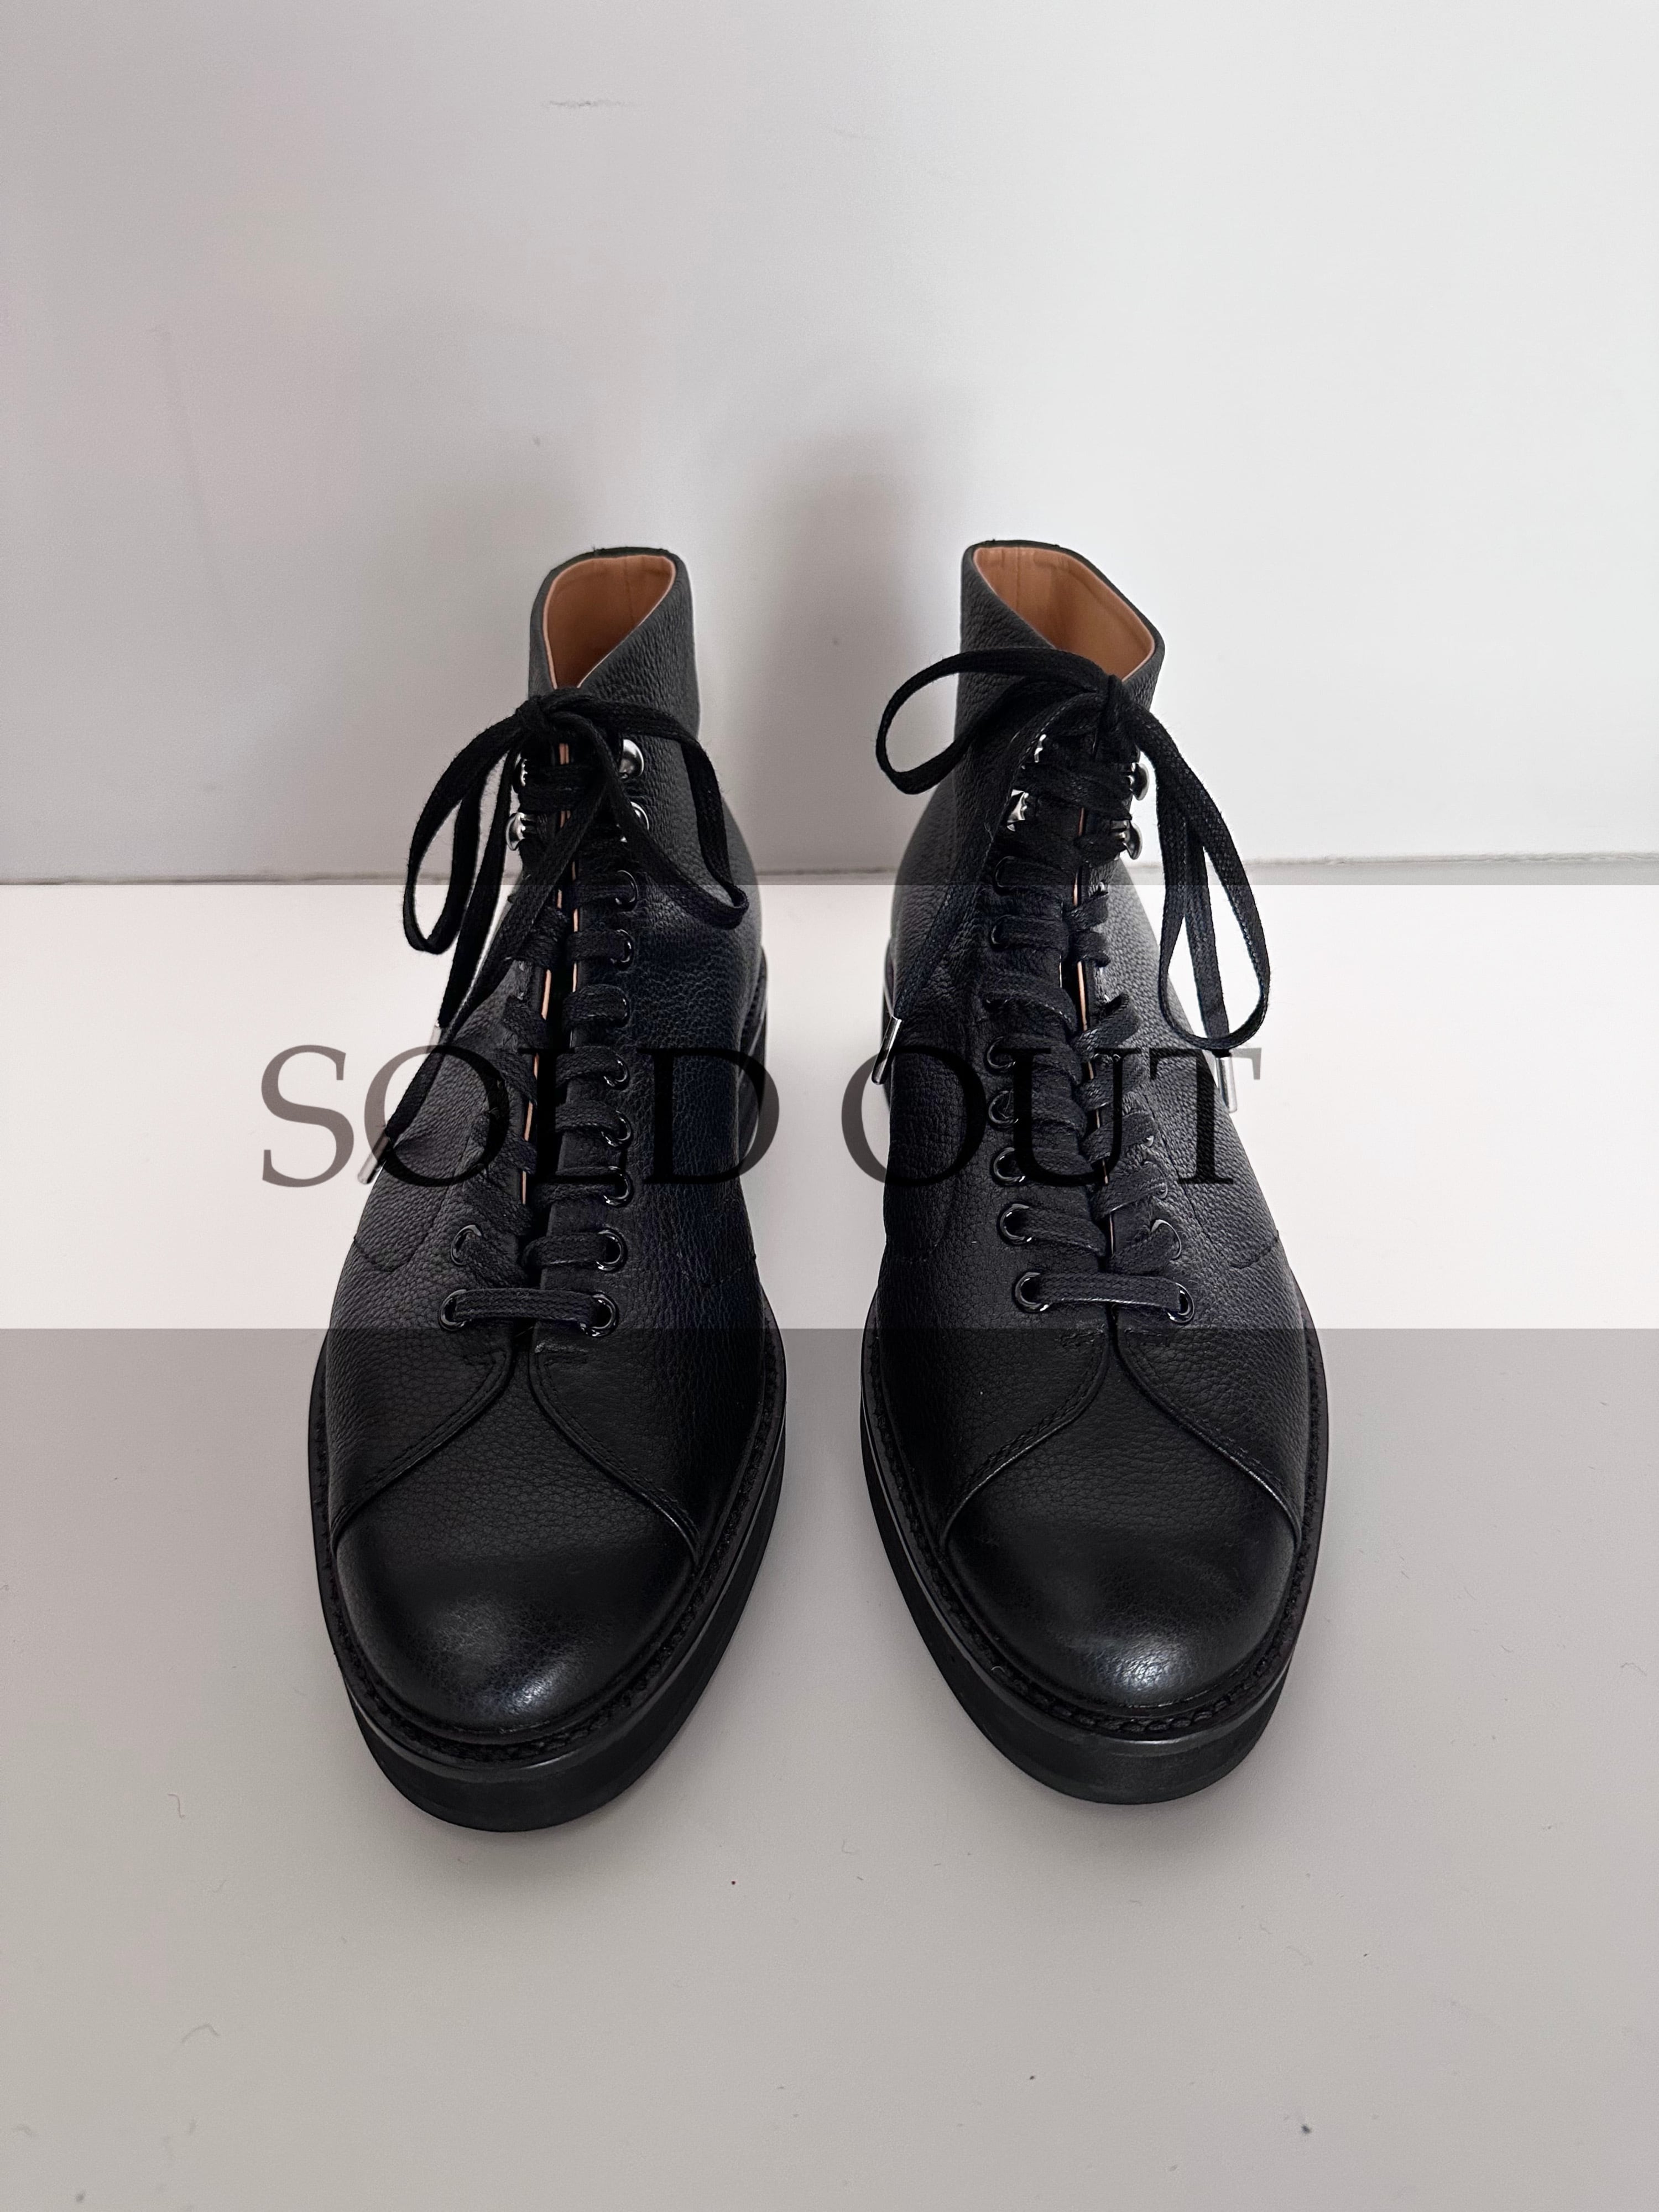 【NY Collection Fitting】Toe Lace up Leather Boots  24cm